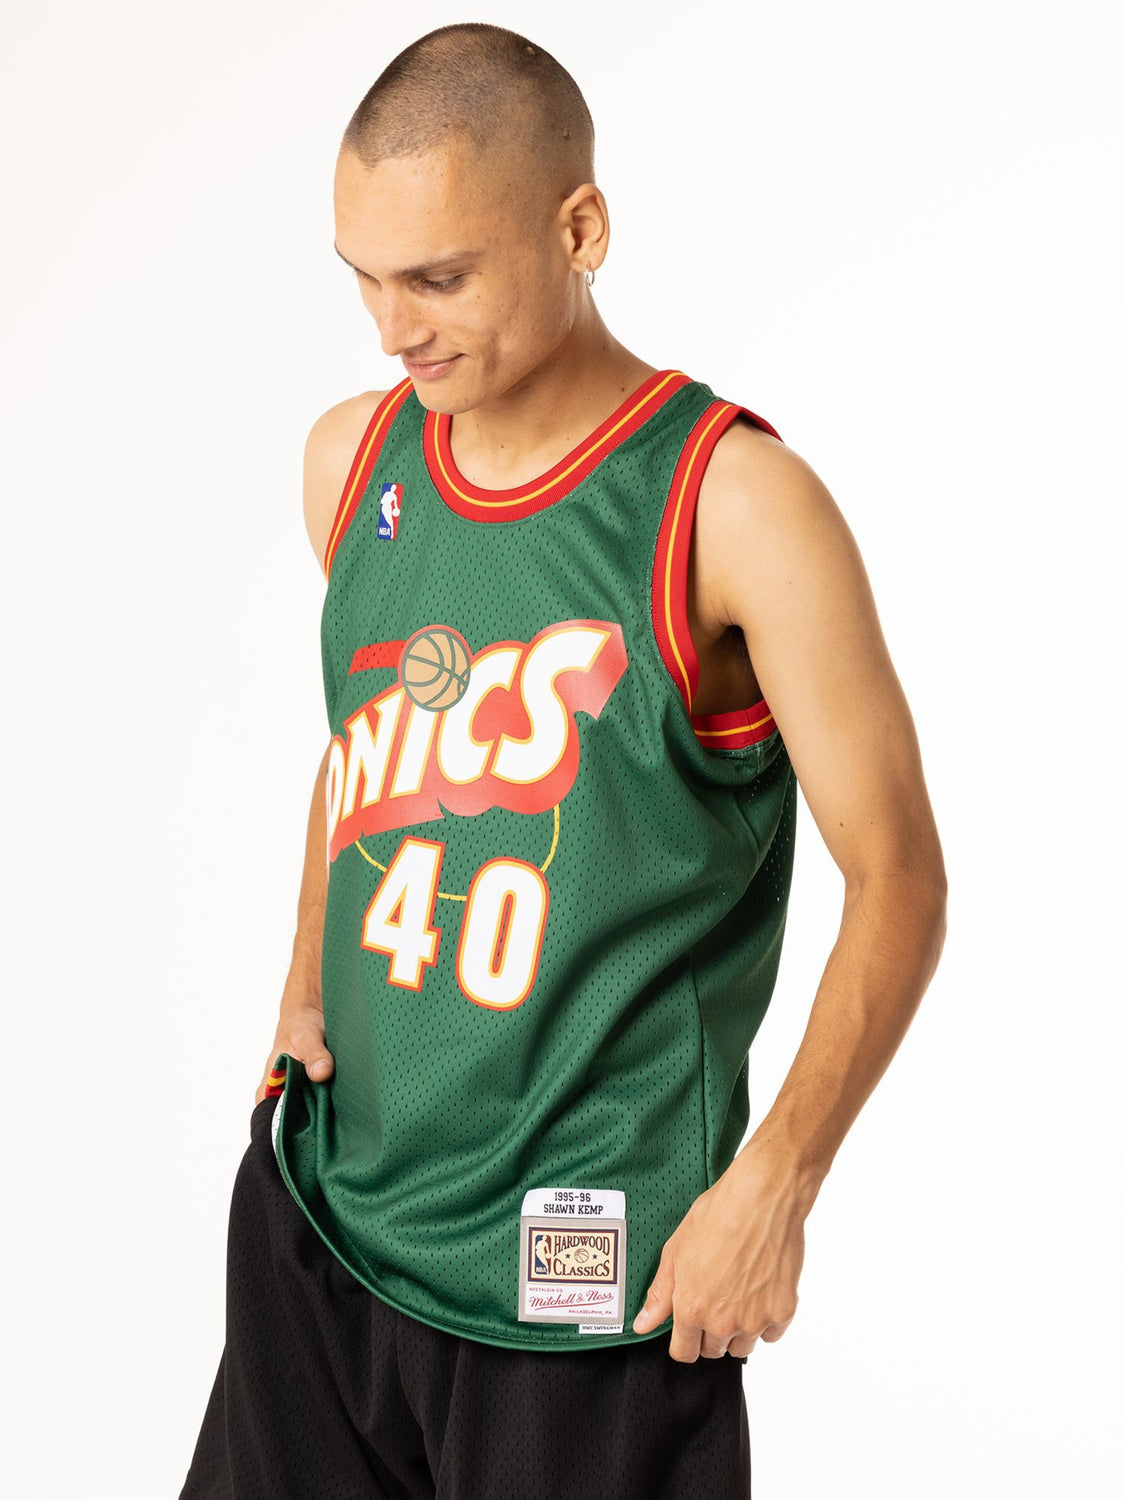 Audible Seattle Supersonics Jersey Shawn Kemp - Shop Mitchell & Ness  Authentic Jerseys and Replicas Mitchell & Ness Nostalgia Co.